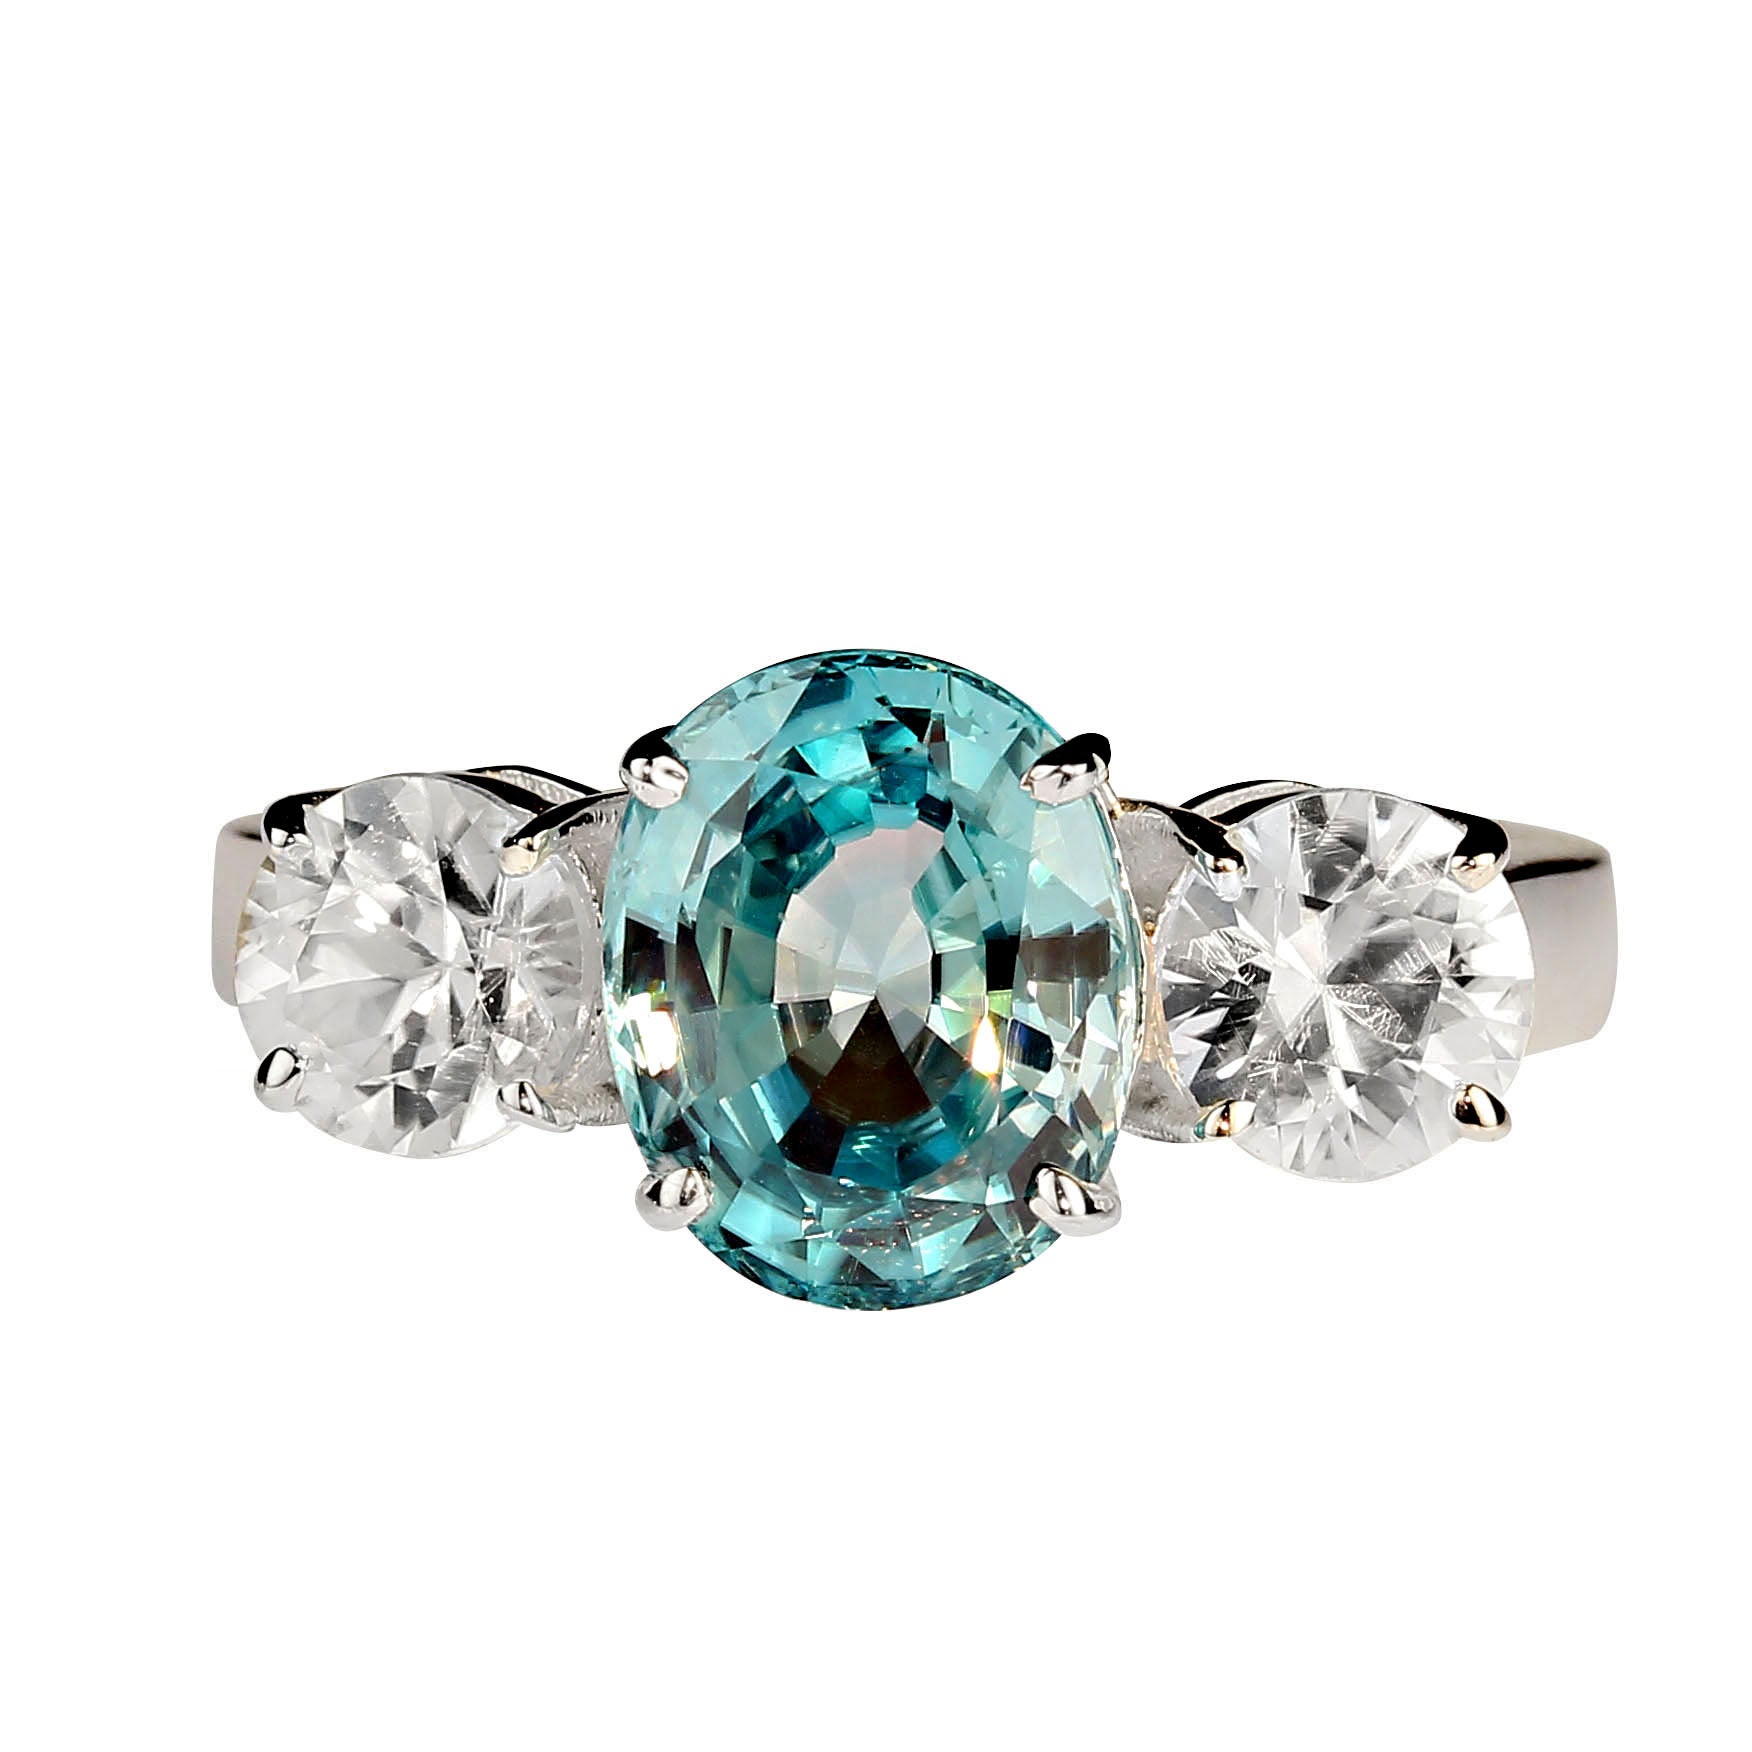 Gorgeous sizzling oval blue zircon, 4.25ct with round side stones, 2.9ct.  All set in glowing sterling silver.  Wear this sparkler all day and evening.  No changes by seller. Sizable 8. Your local jeweler can make changes for you.  MR2339.